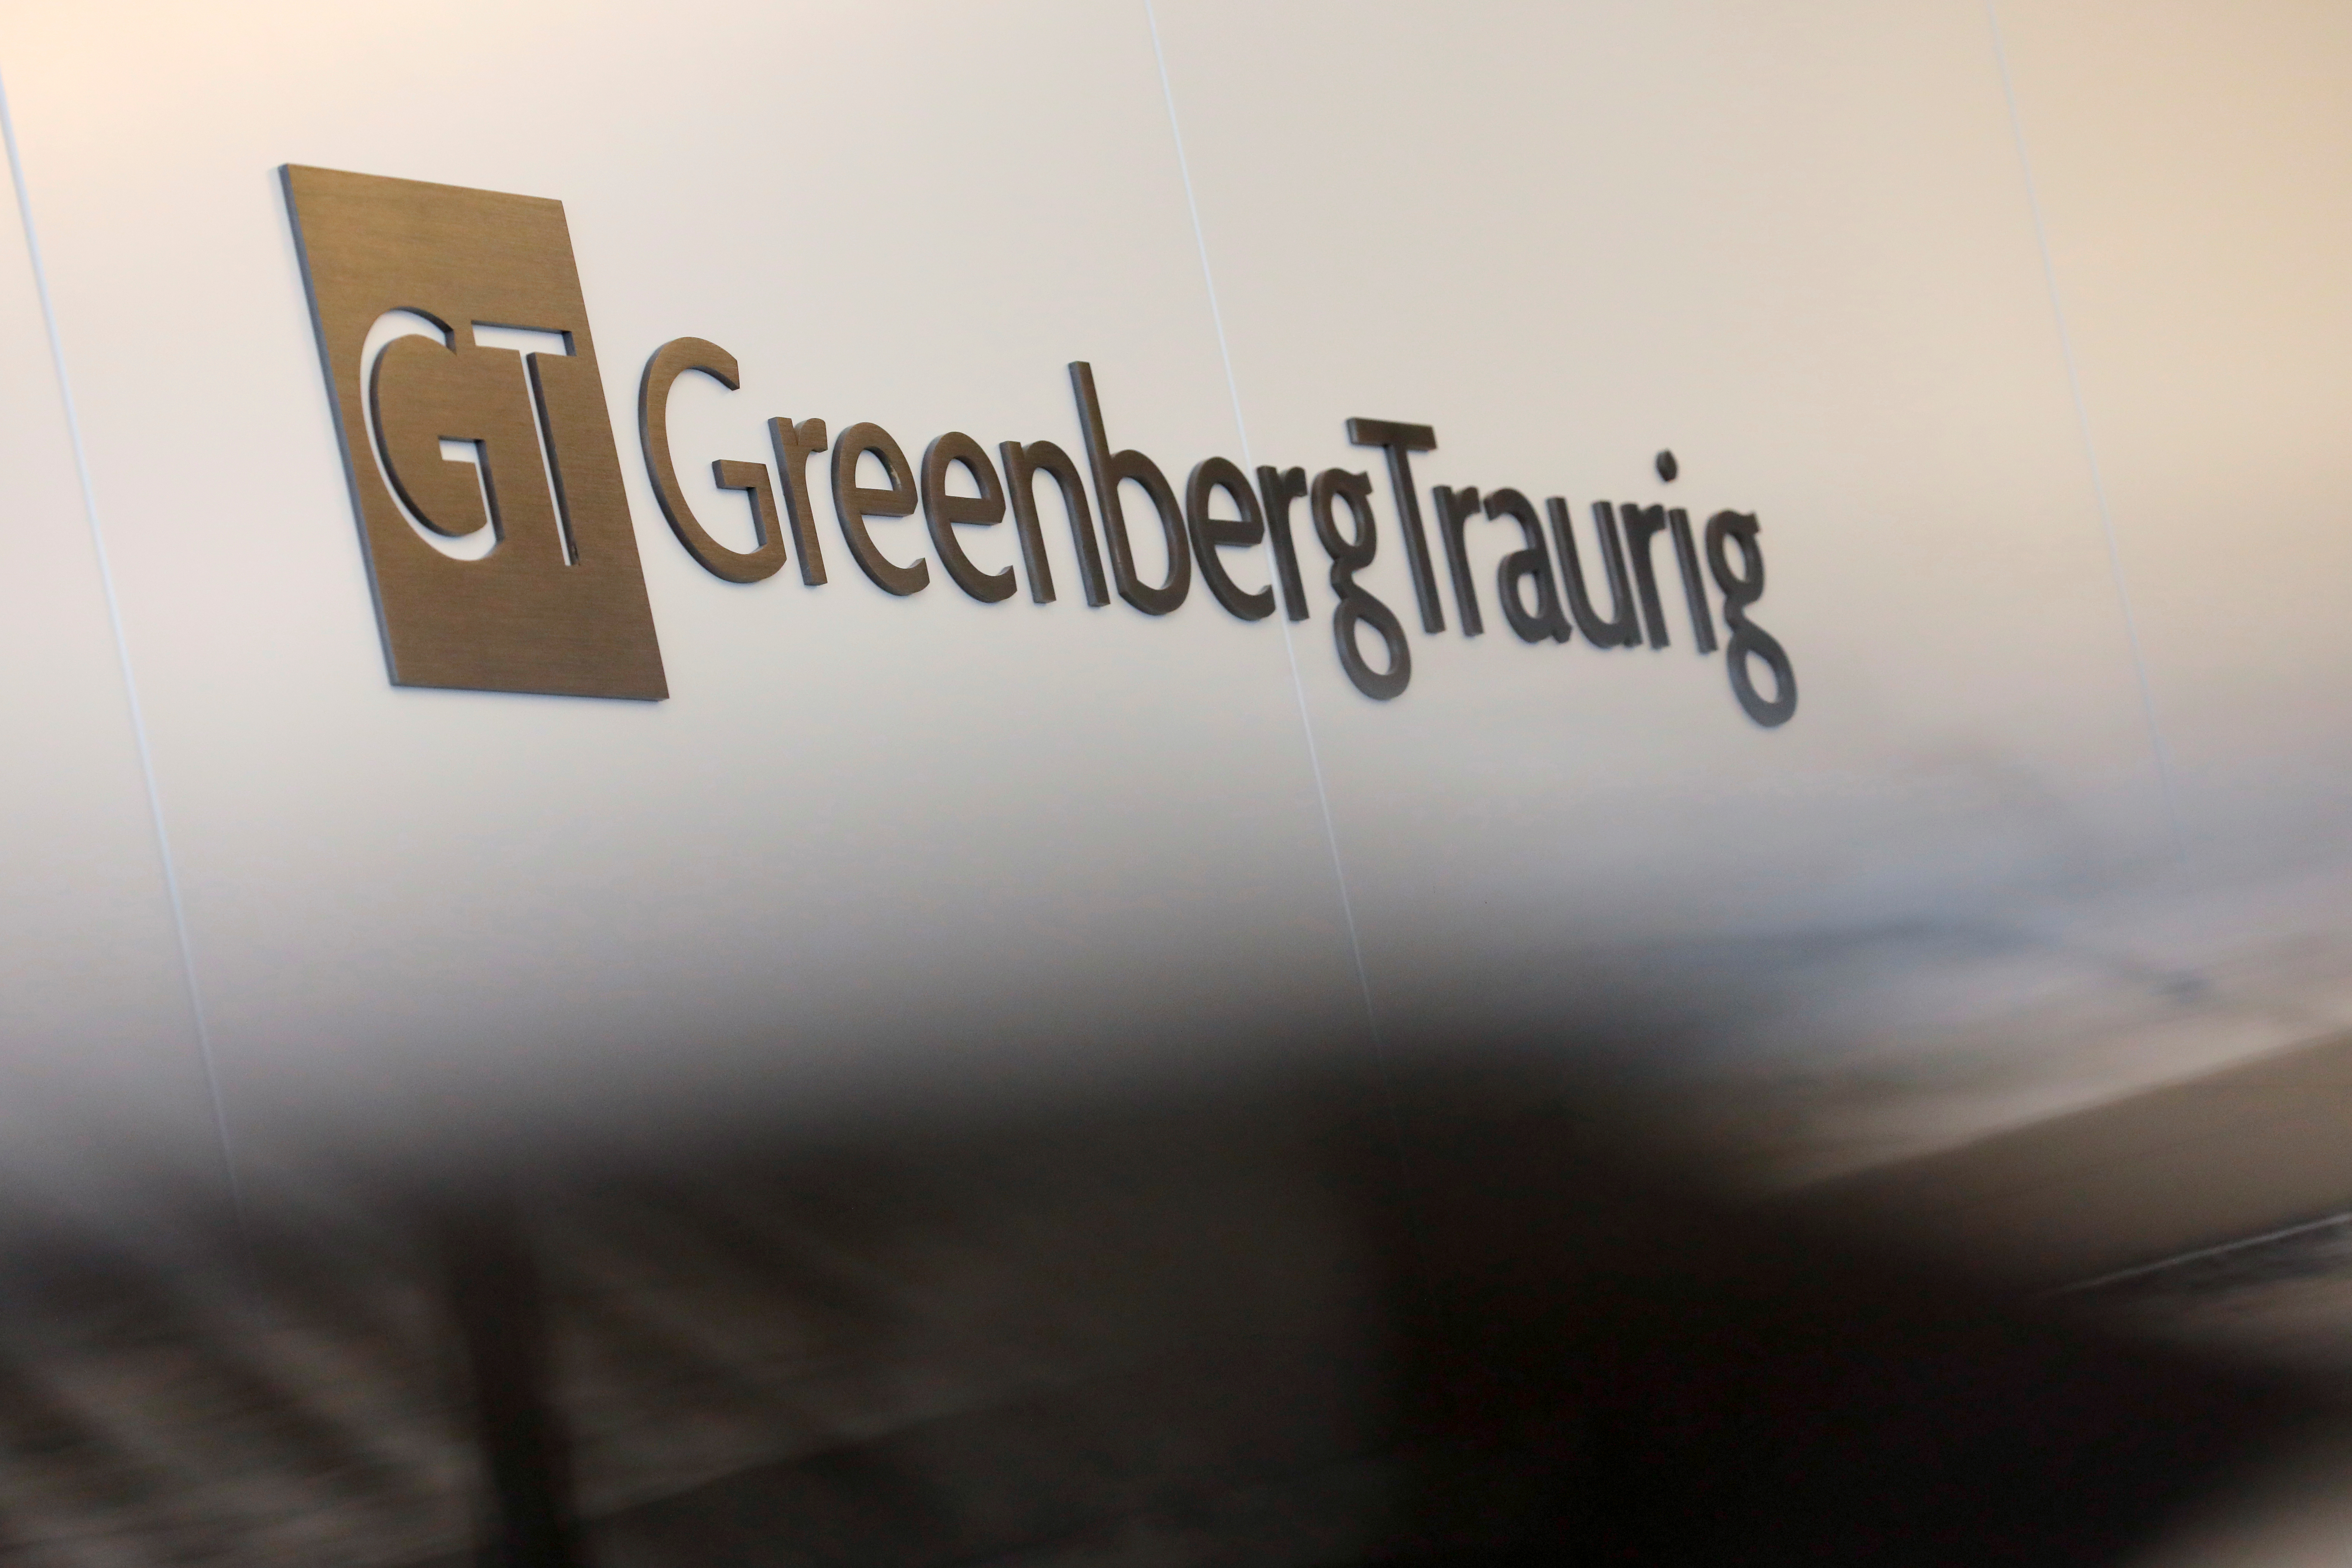 Greenberg Traurig offices in Washington, D.C. REUTERS/Andrew Kelly